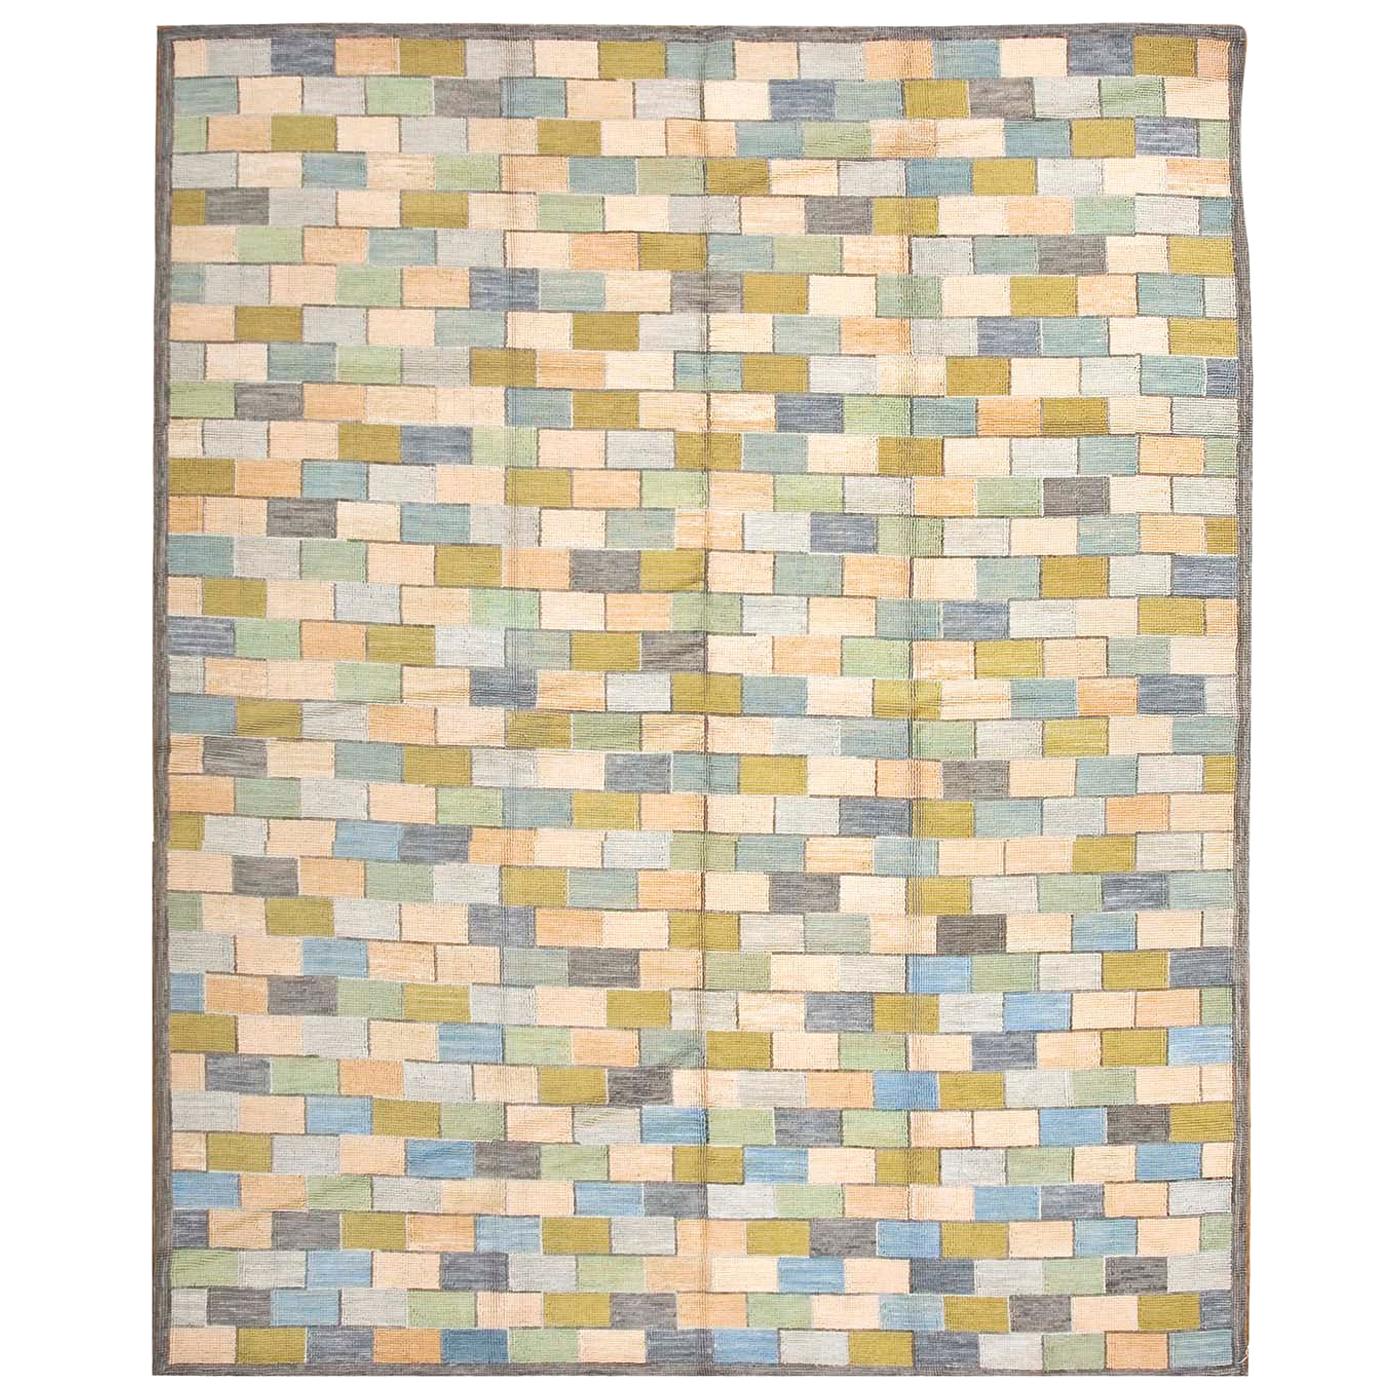 Contemporary American Cotton Hooked Rug 10' 0" x 14' 0" (305 x 427 cm) For Sale